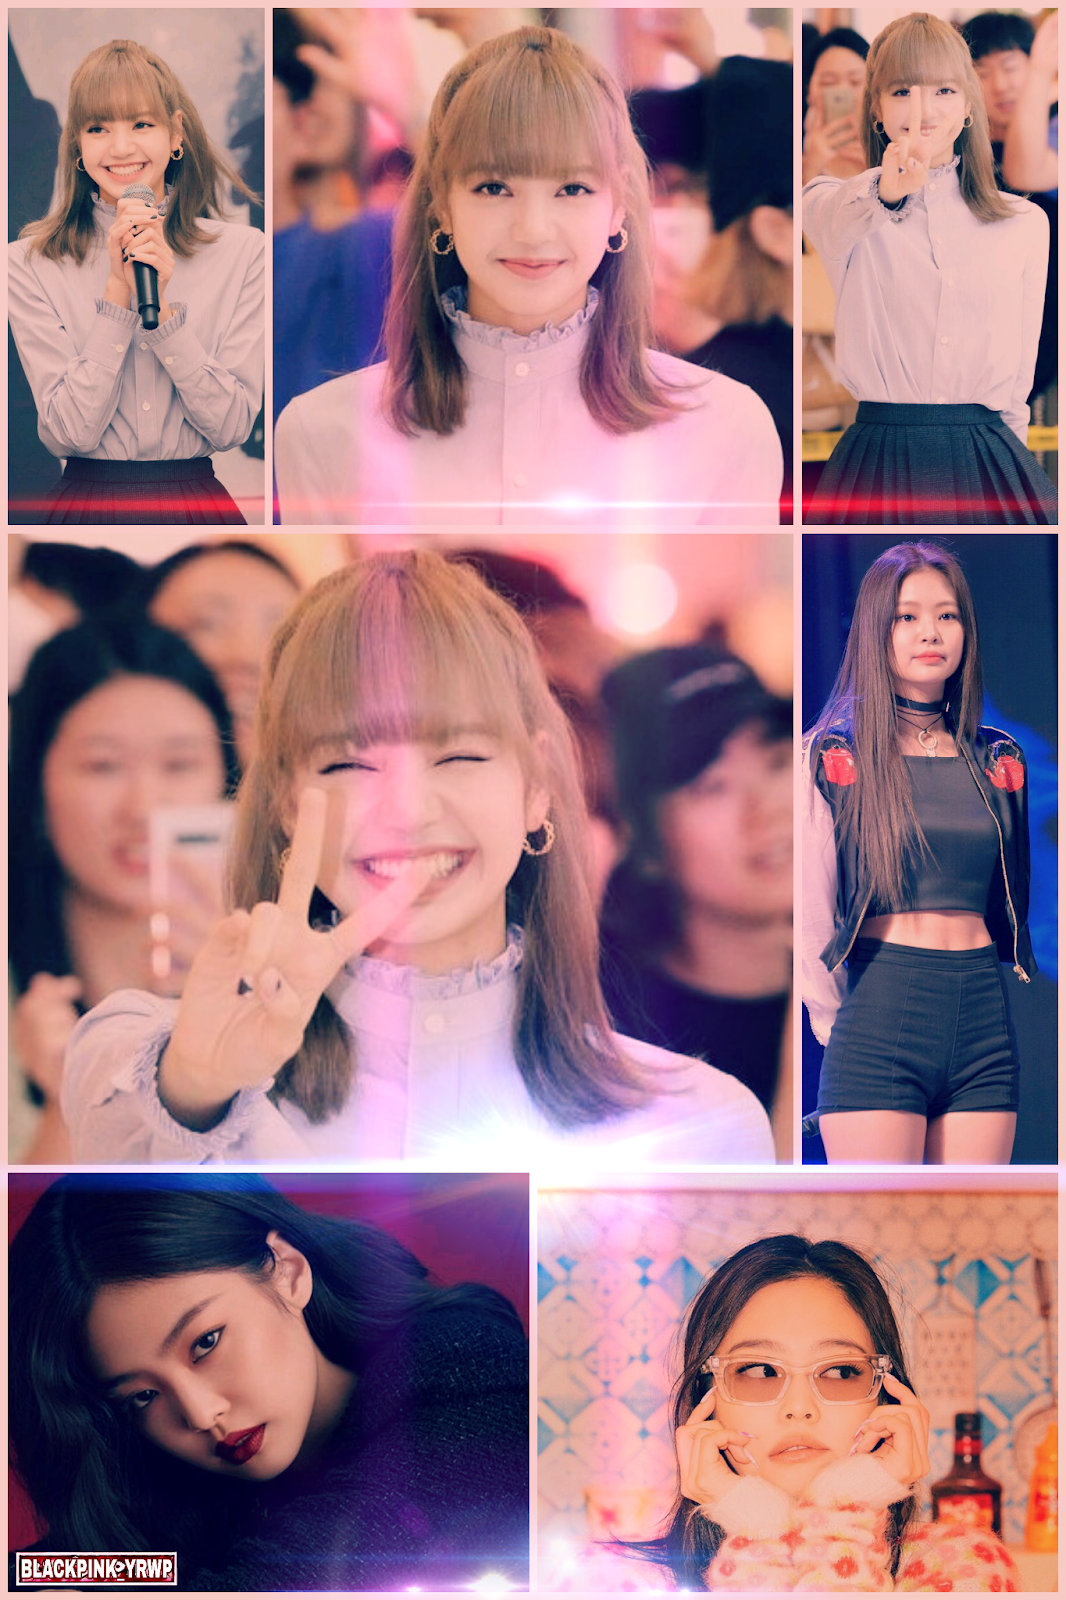 BLACKPINK WALLPAPER : 5 PIECES PHOTO IN 1 HIGH QUALITY | BLACKPINK ...